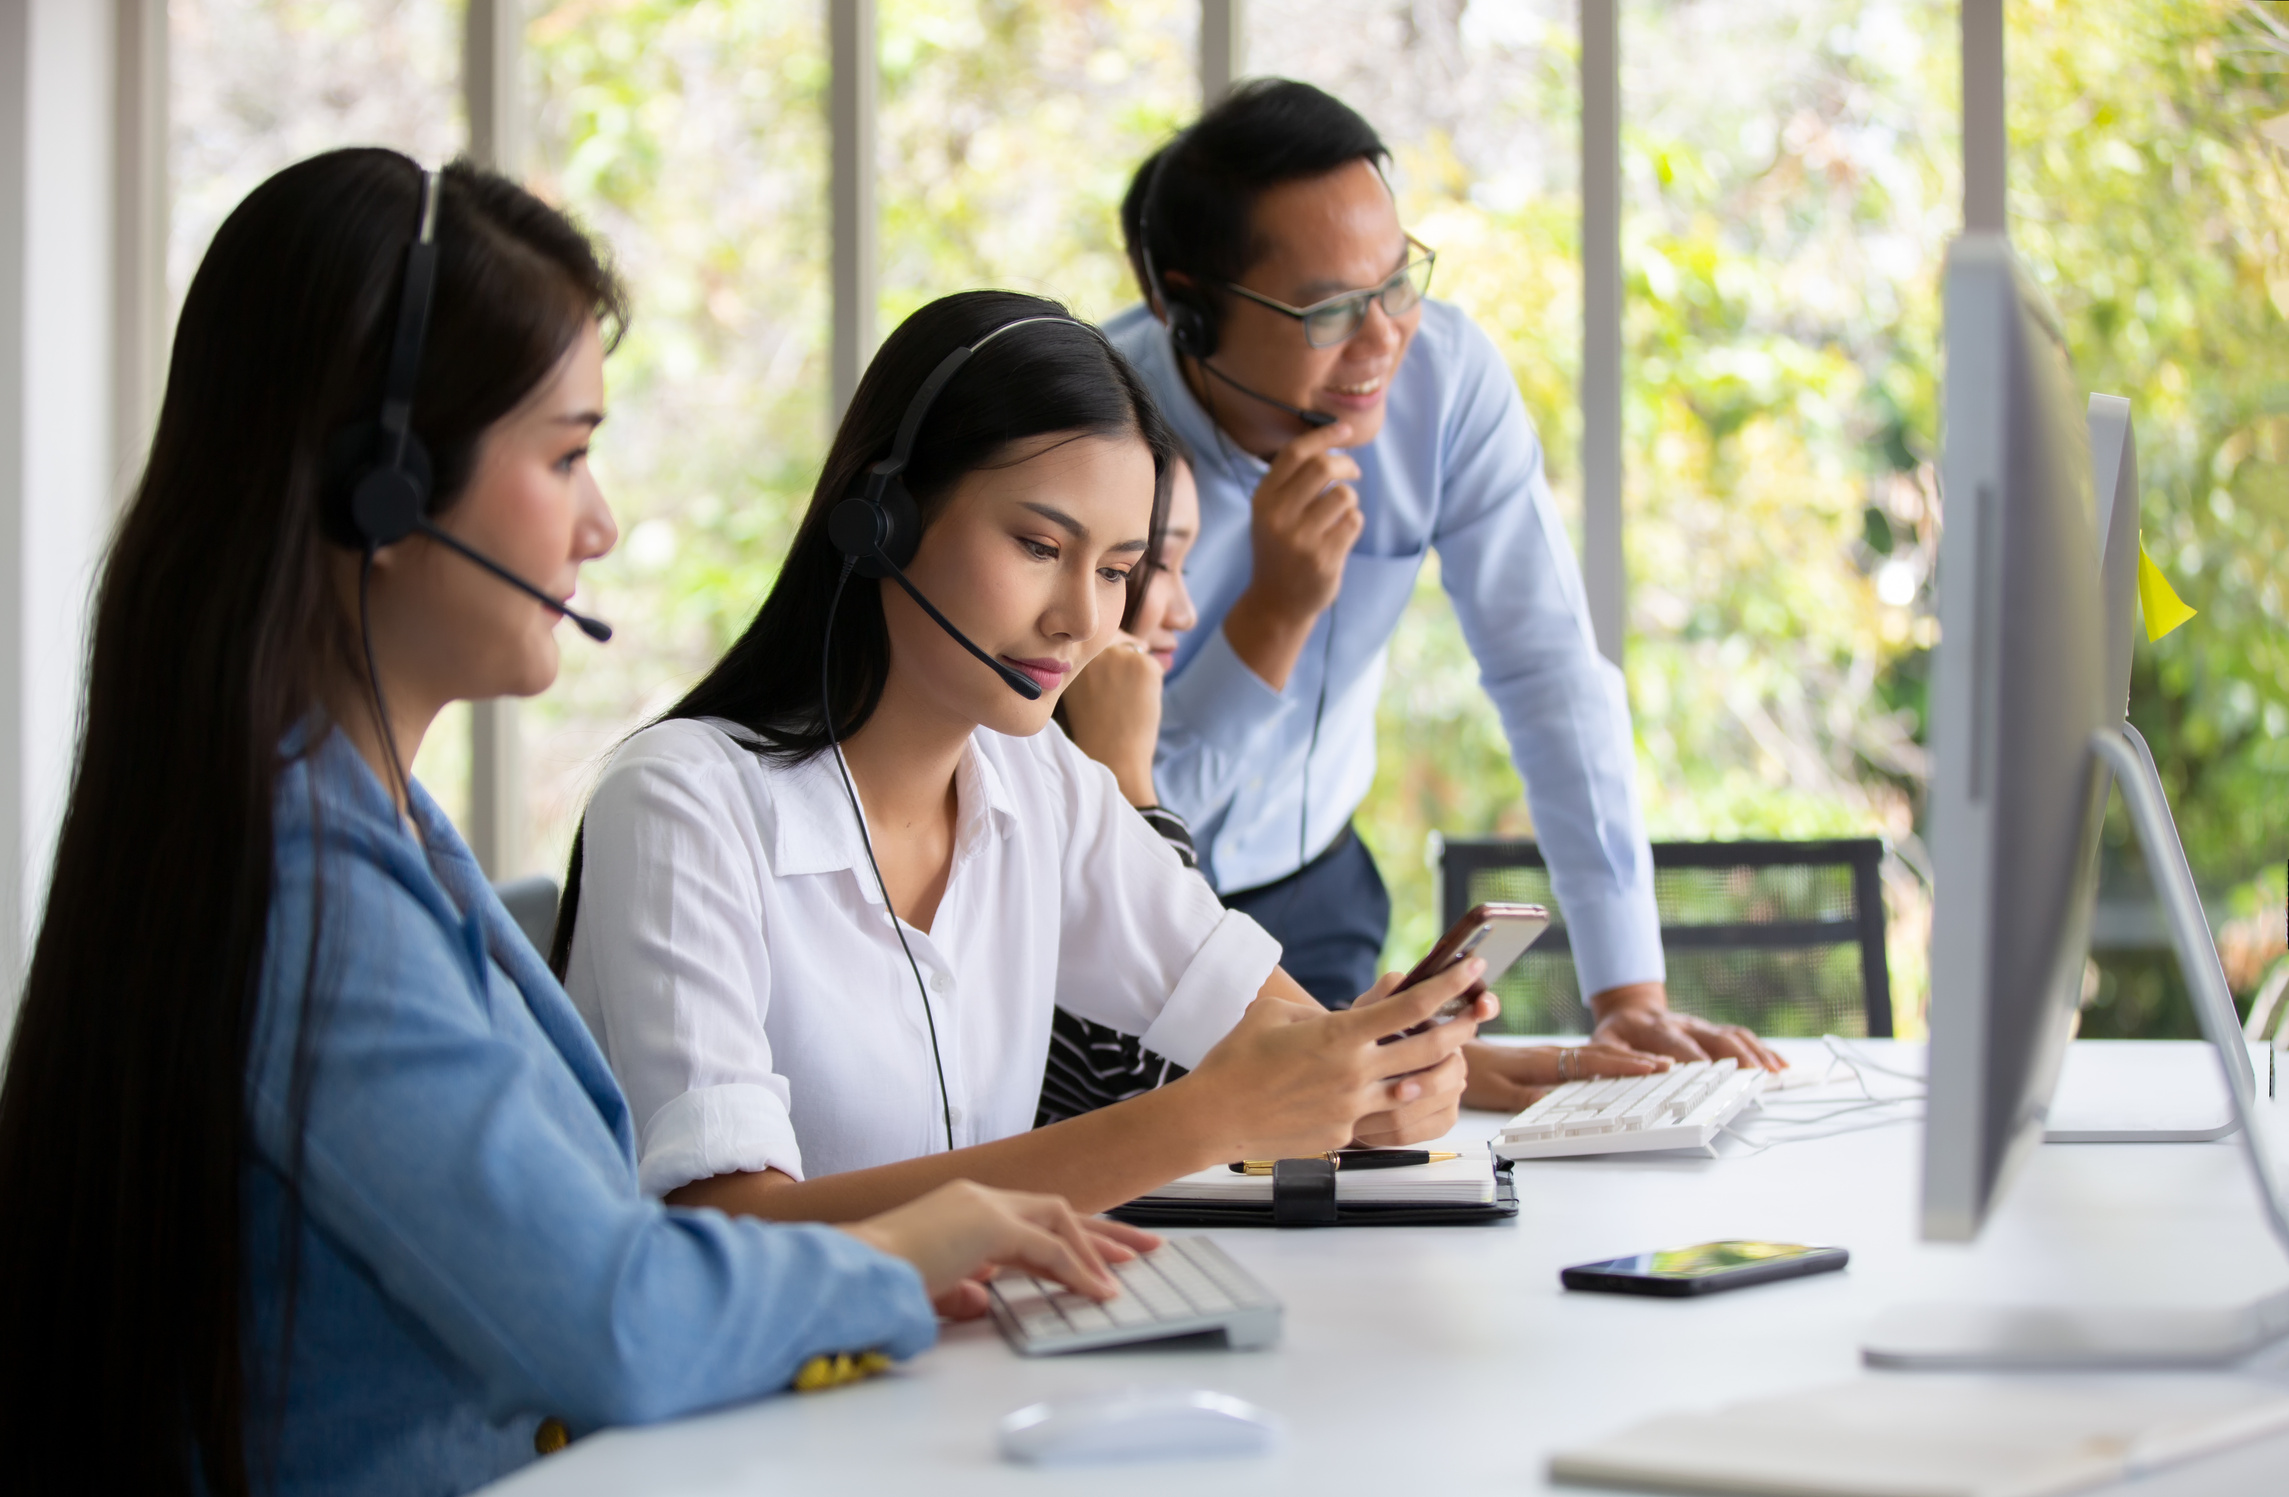 Call Center Agents with Headsets Sitting in the Office